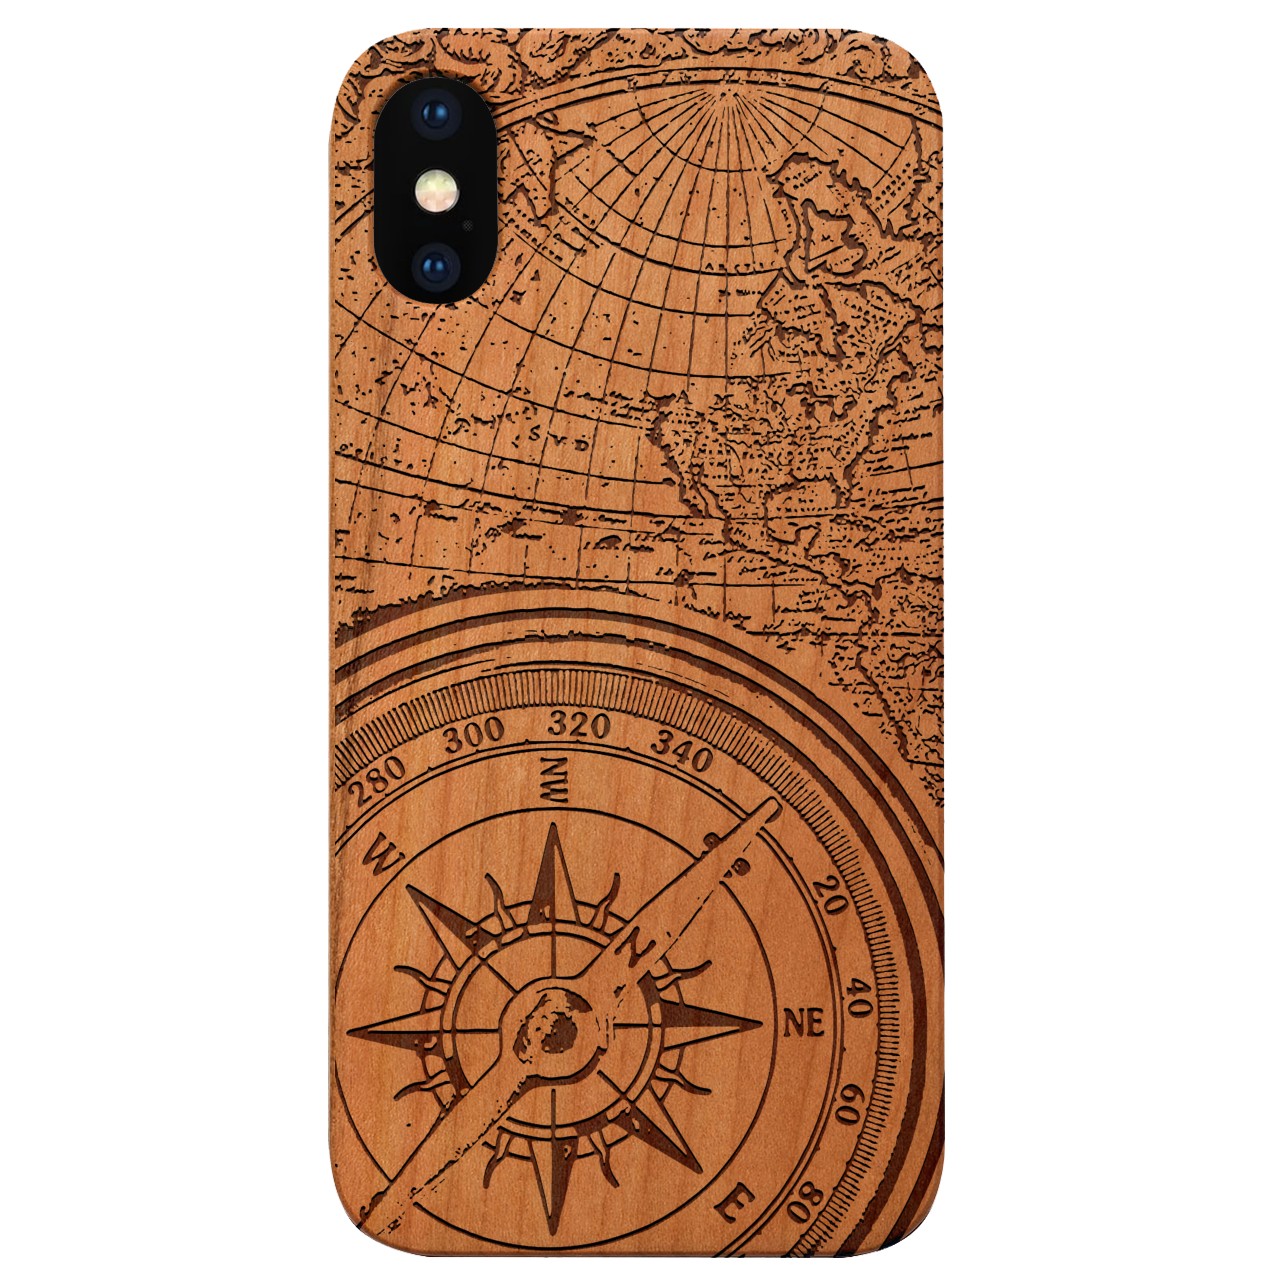  Compass - Engraved - Wooden Phone Case - IPhone 13 Models